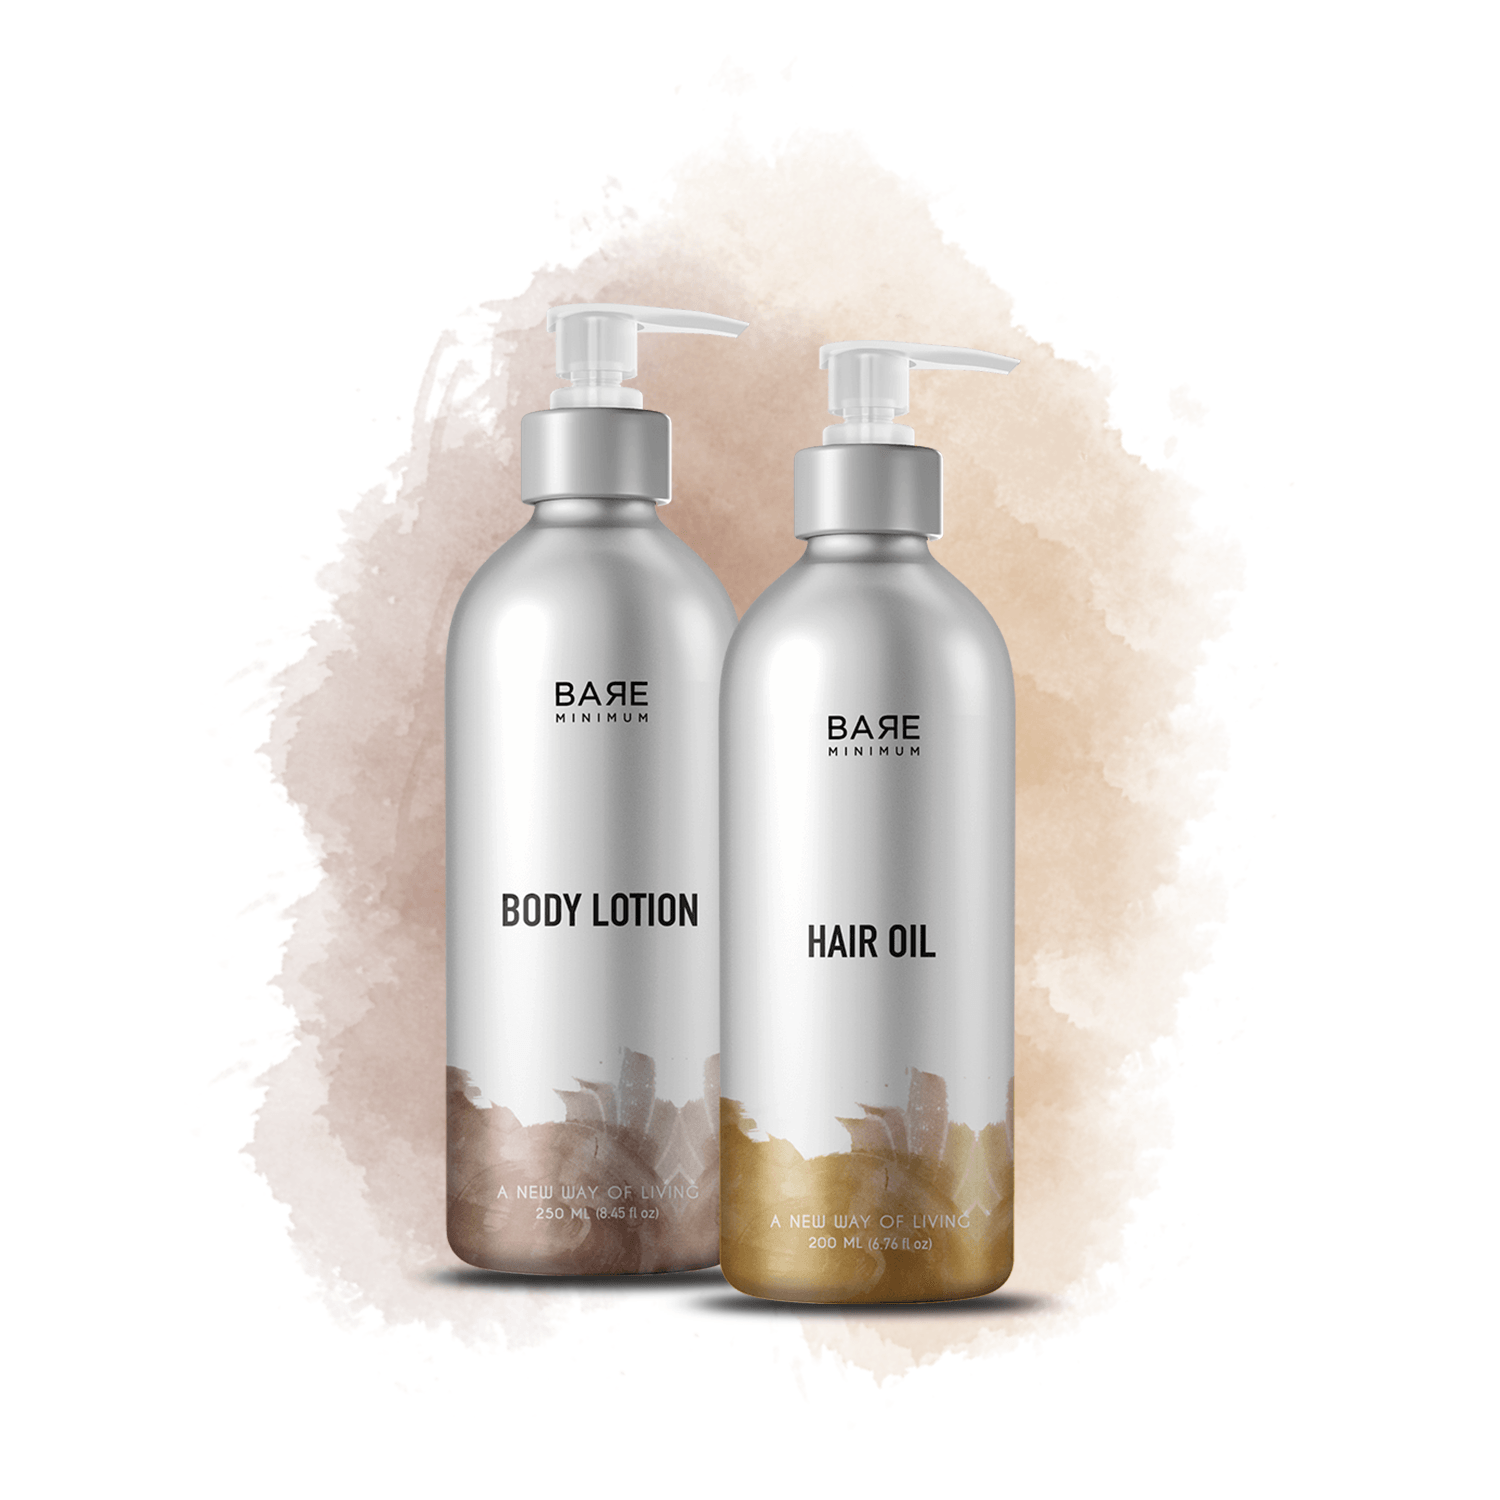 Bare Minimum | Combo of Hair Oil + Body Lotion | 100% Natural | No Sulfate | pH Balanced Formula | Prevents Hair Damage And Hair Loss | For All Scalp Types (Hair Oil 250ml + Body Lotion 250ml)